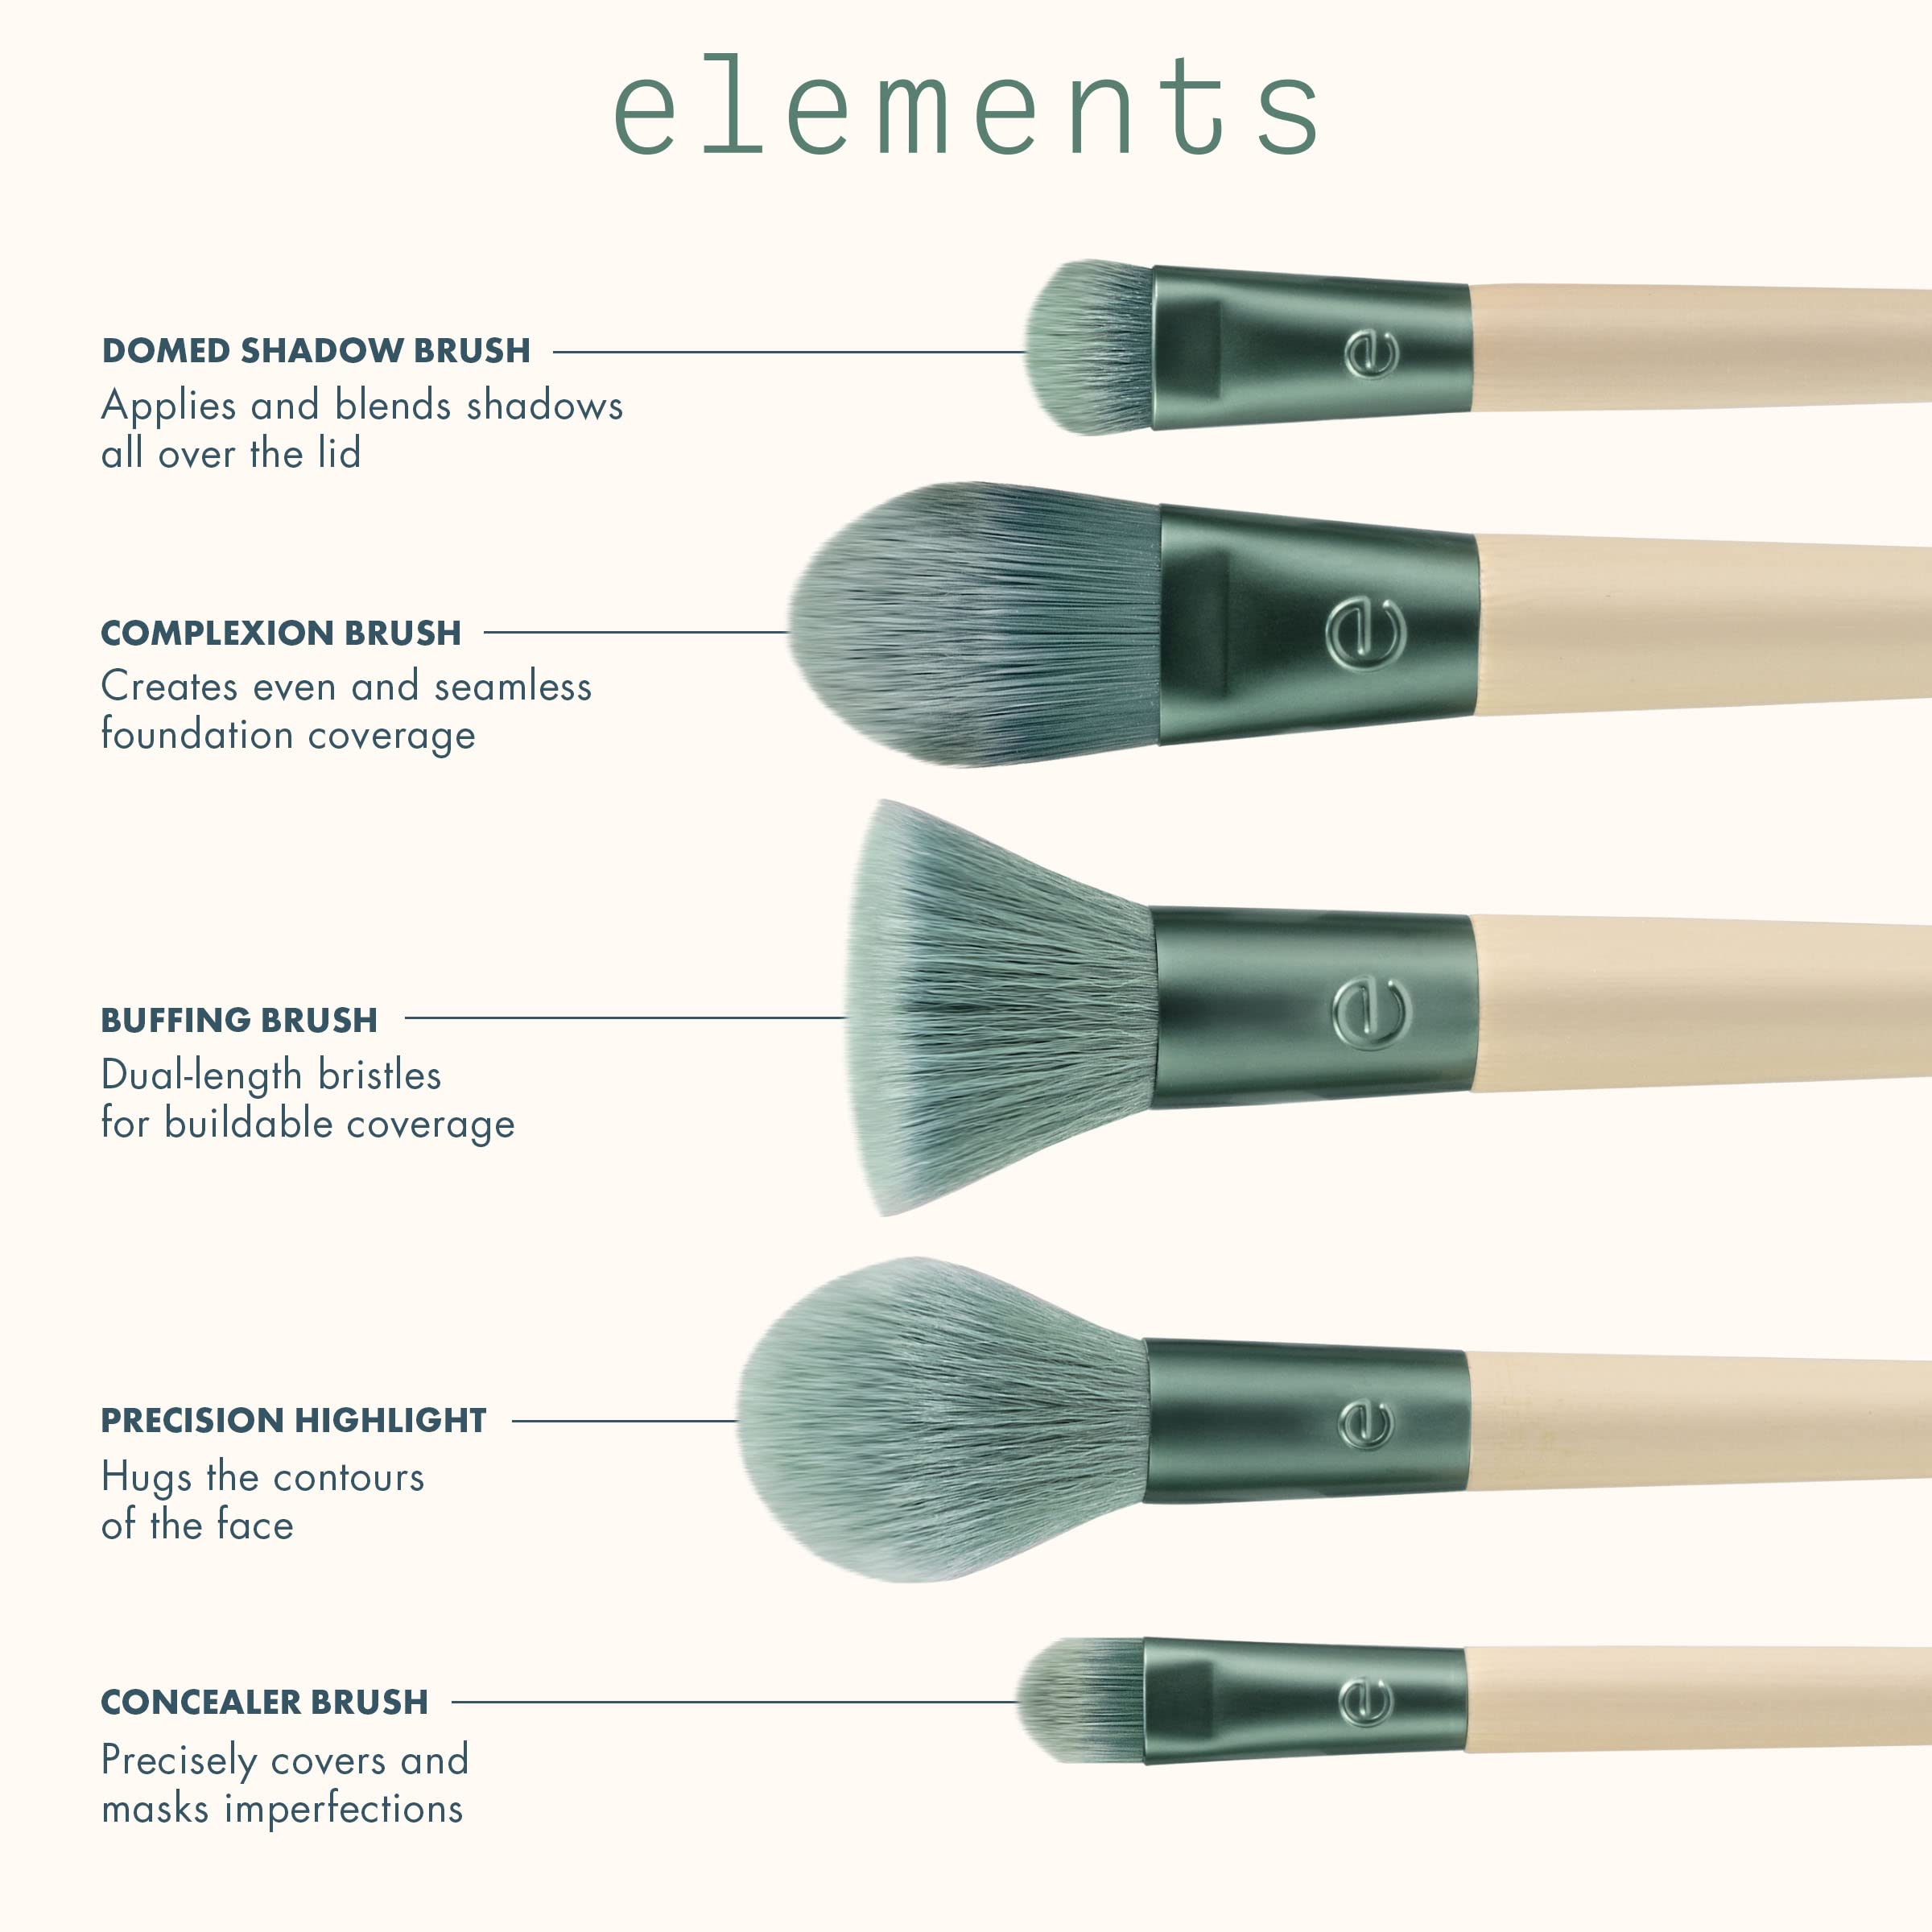 EcoTools Elements Super-Natural Face Makeup Brush Kit, For Foundation, Bronzer, Blush, & Eye Makeup, Works Best With Liquid, Cream, & Powder Products, Limited Edition, 5 Piece Set